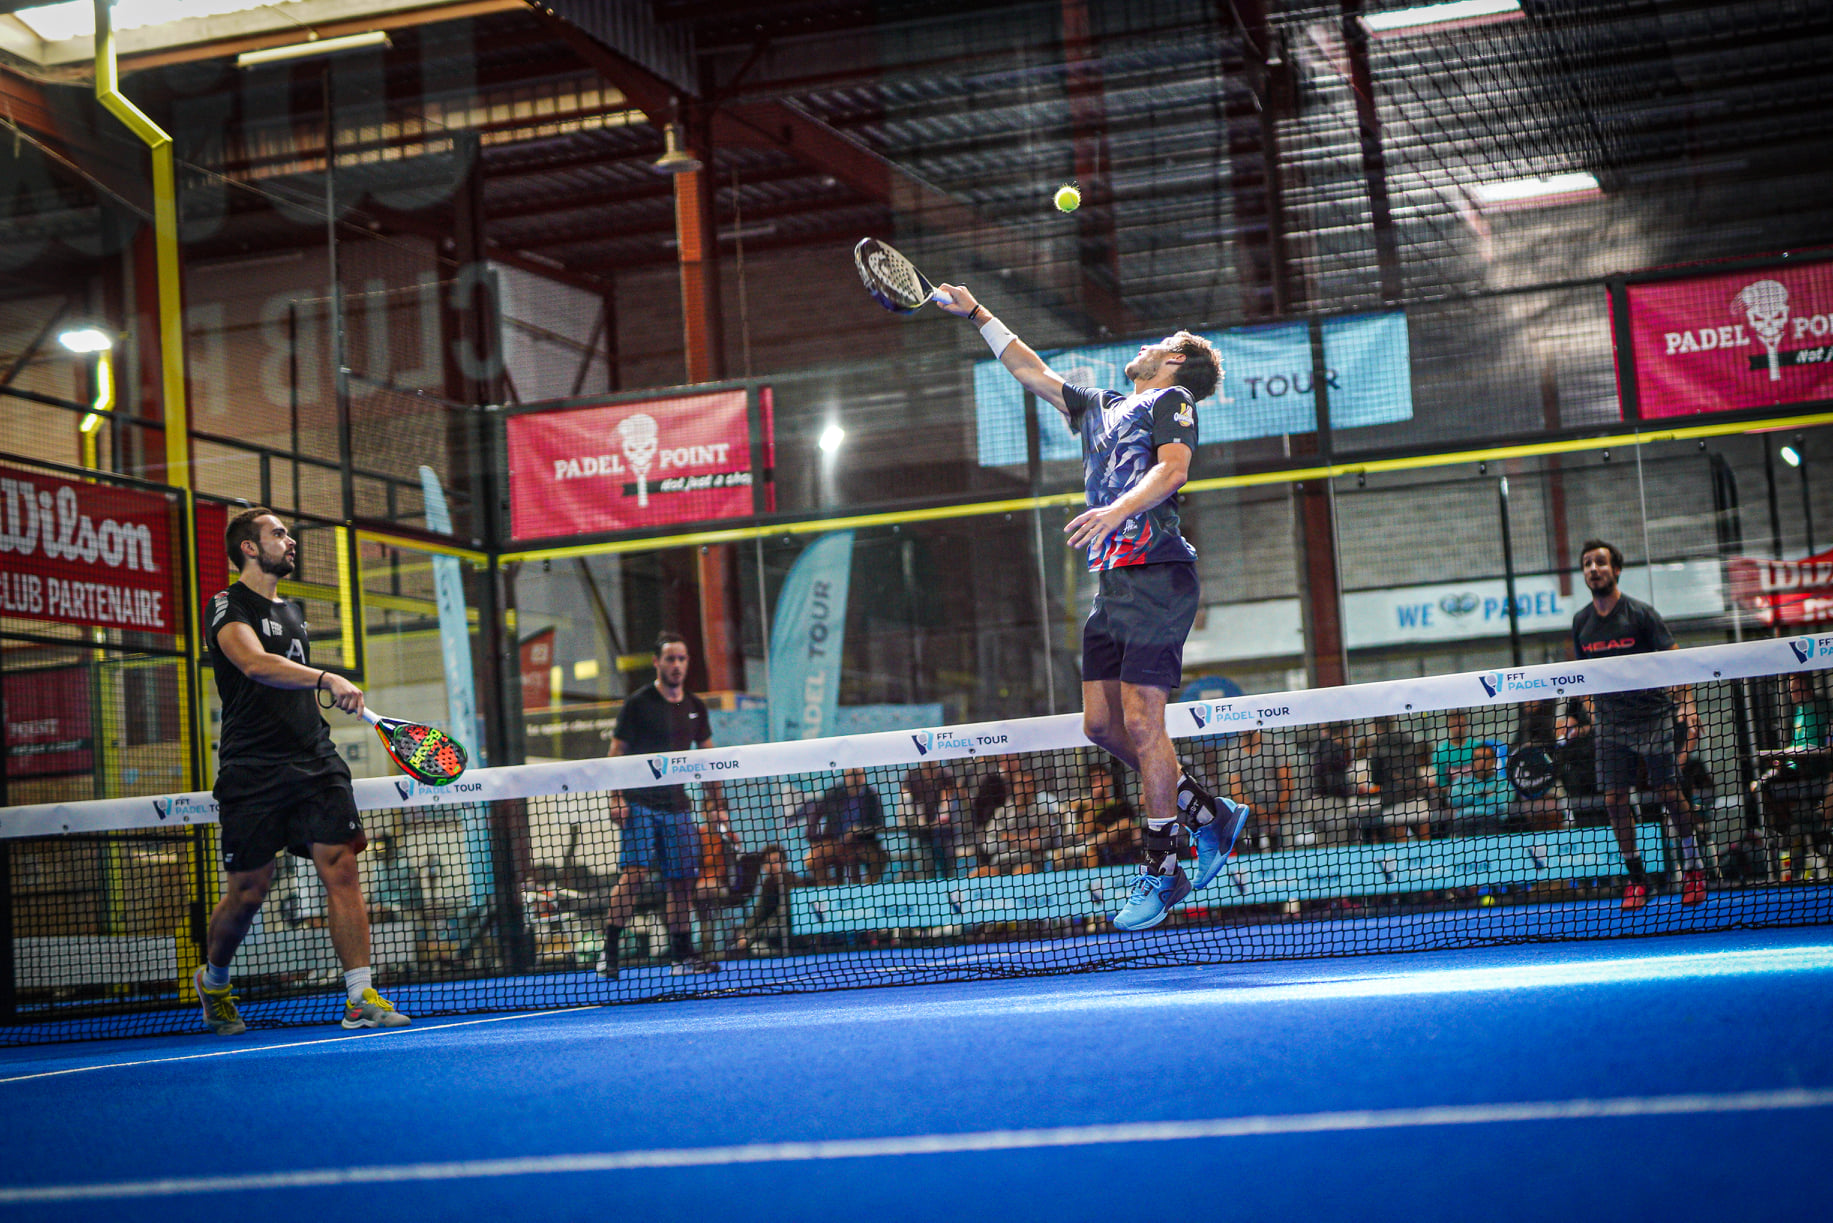 FFT Padel Tour Strasbourg – Timetables and tables